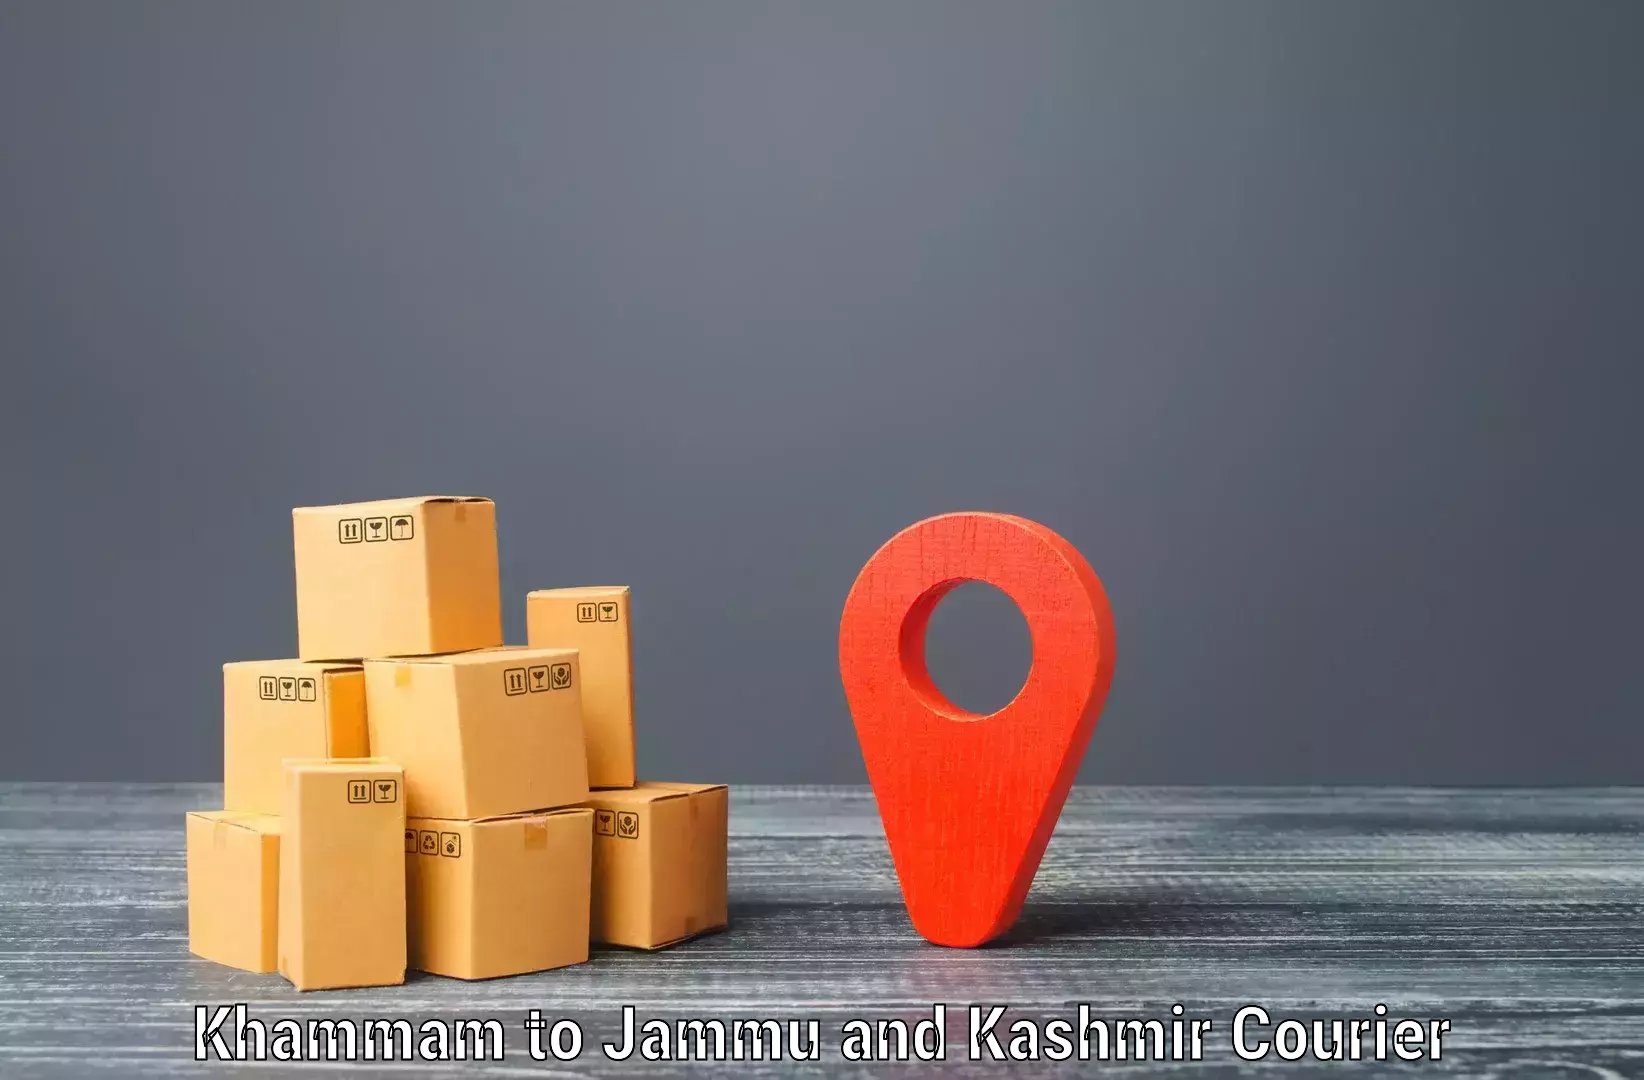 24-hour delivery options Khammam to Jammu and Kashmir